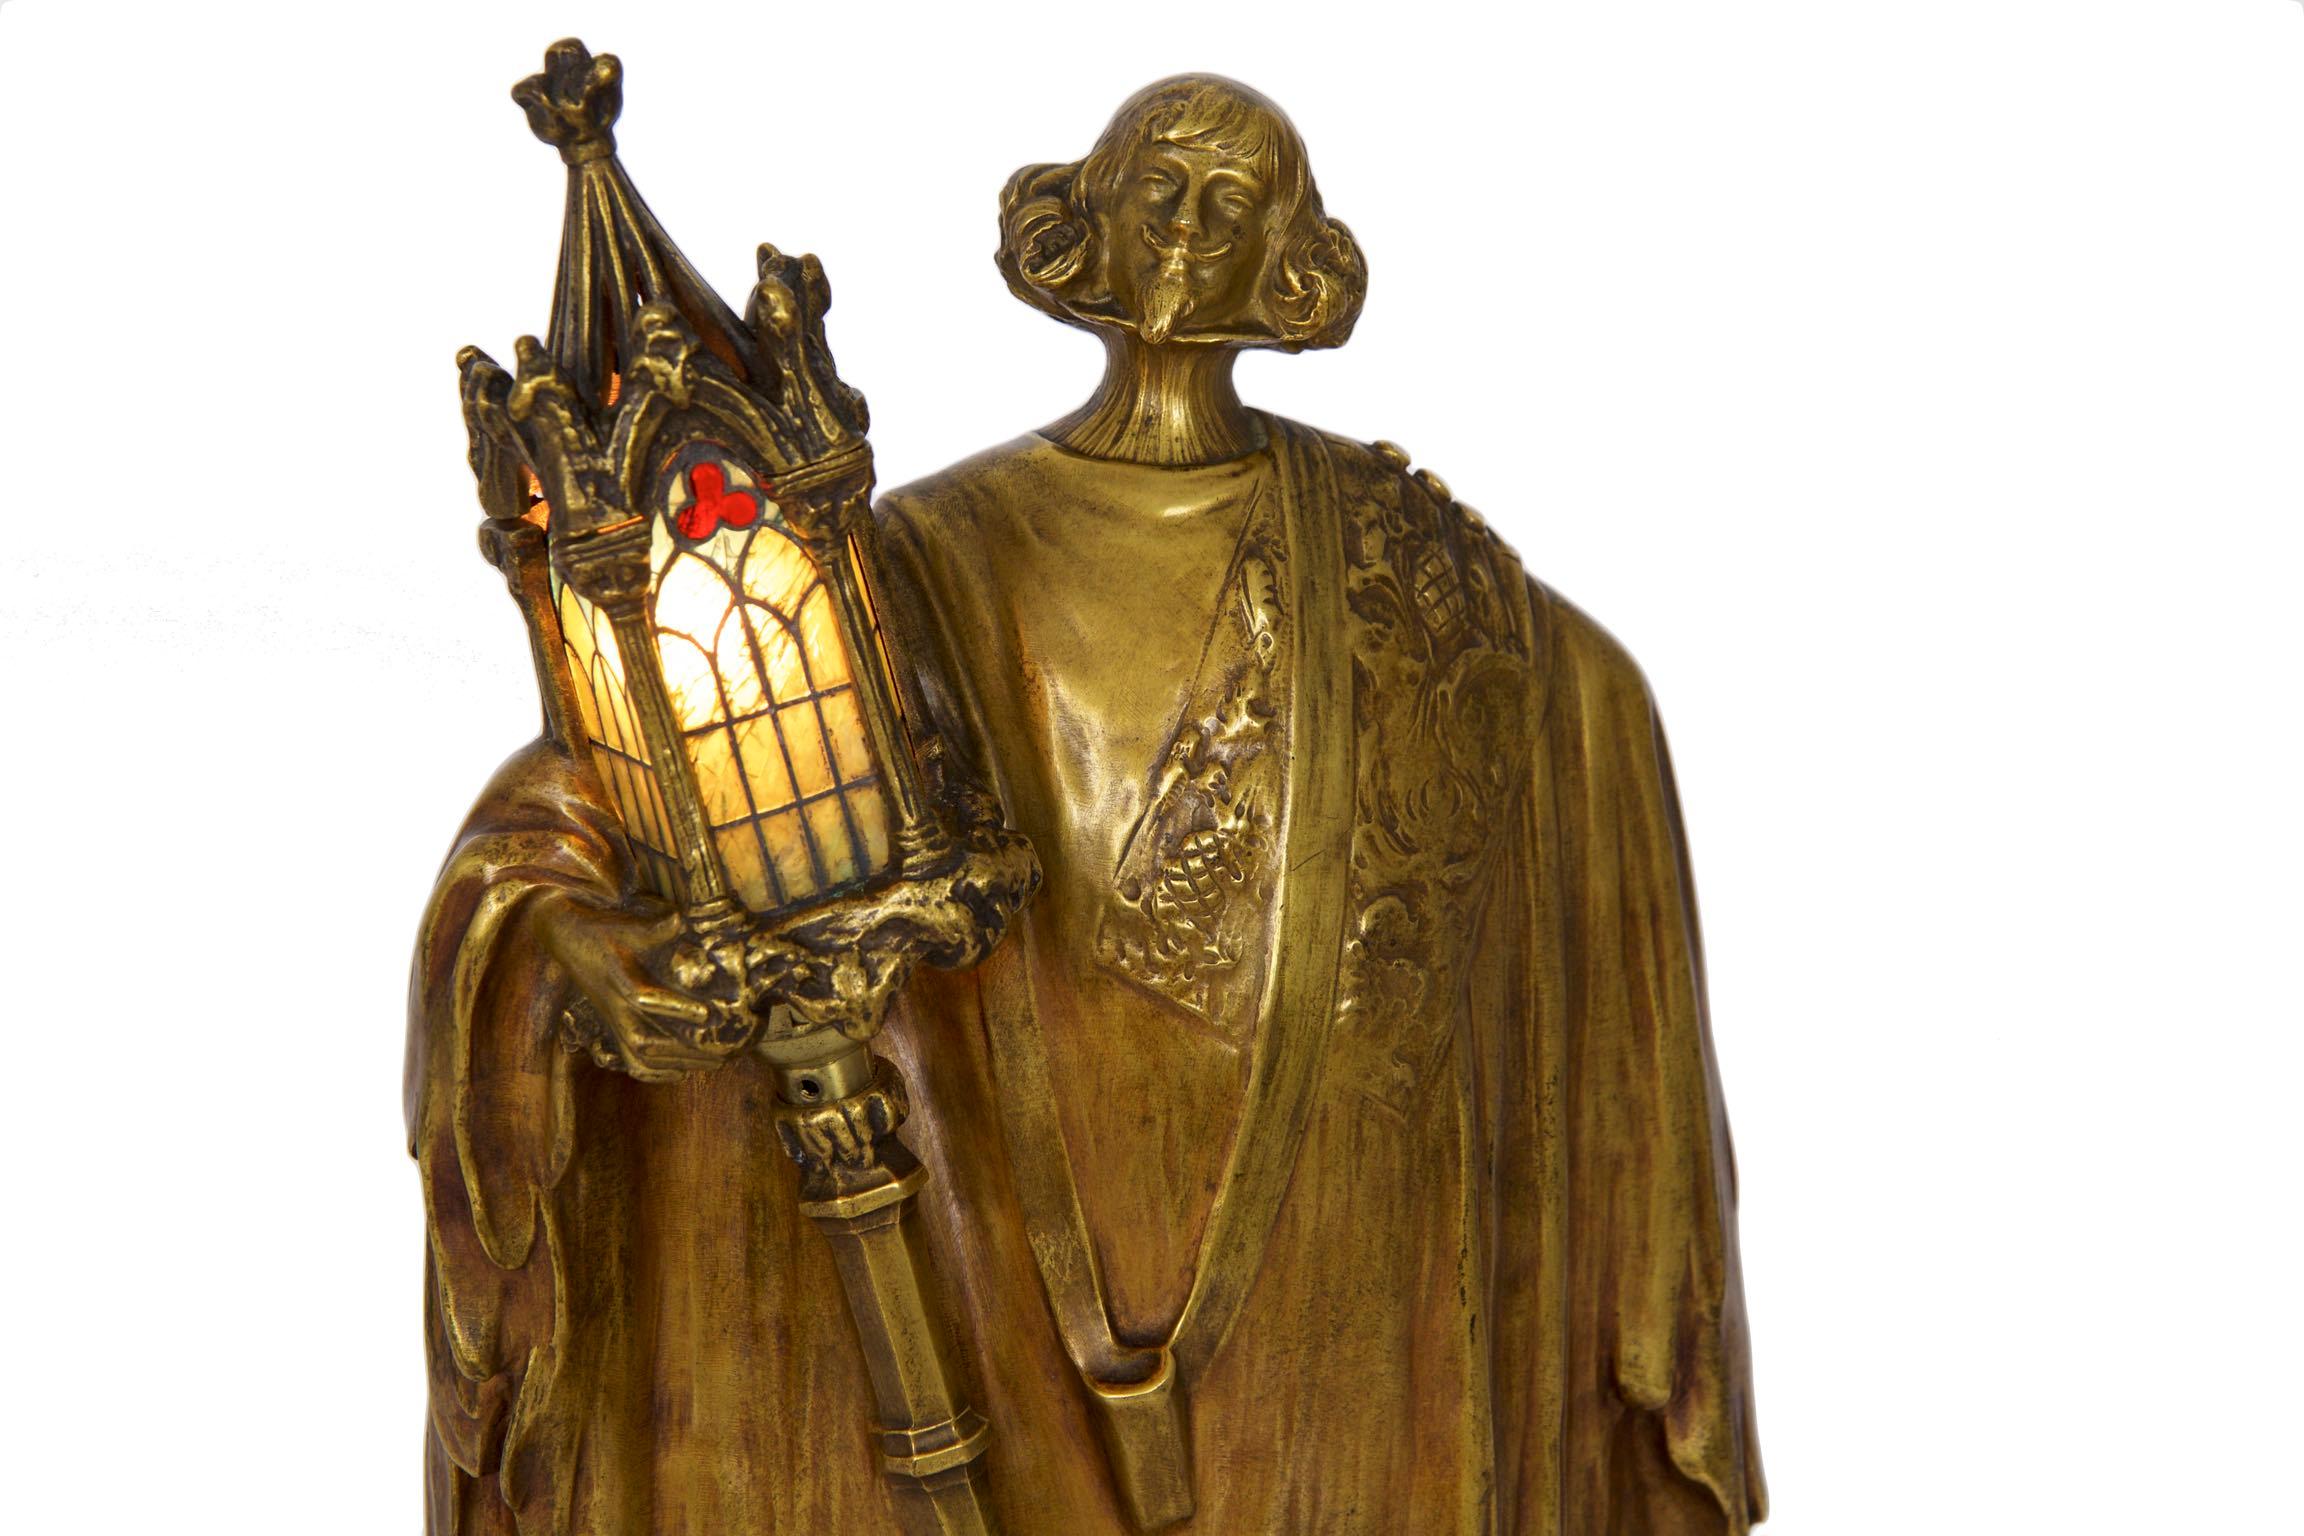 A very rare figural lamp by Léo Laporte-Blairsy, it depicts a mustached man in long robes carrying a Gothic lantern on post with his head held high. Tiny pieces of cut glass in iron astragals make up the three colored panels of the lantern, this